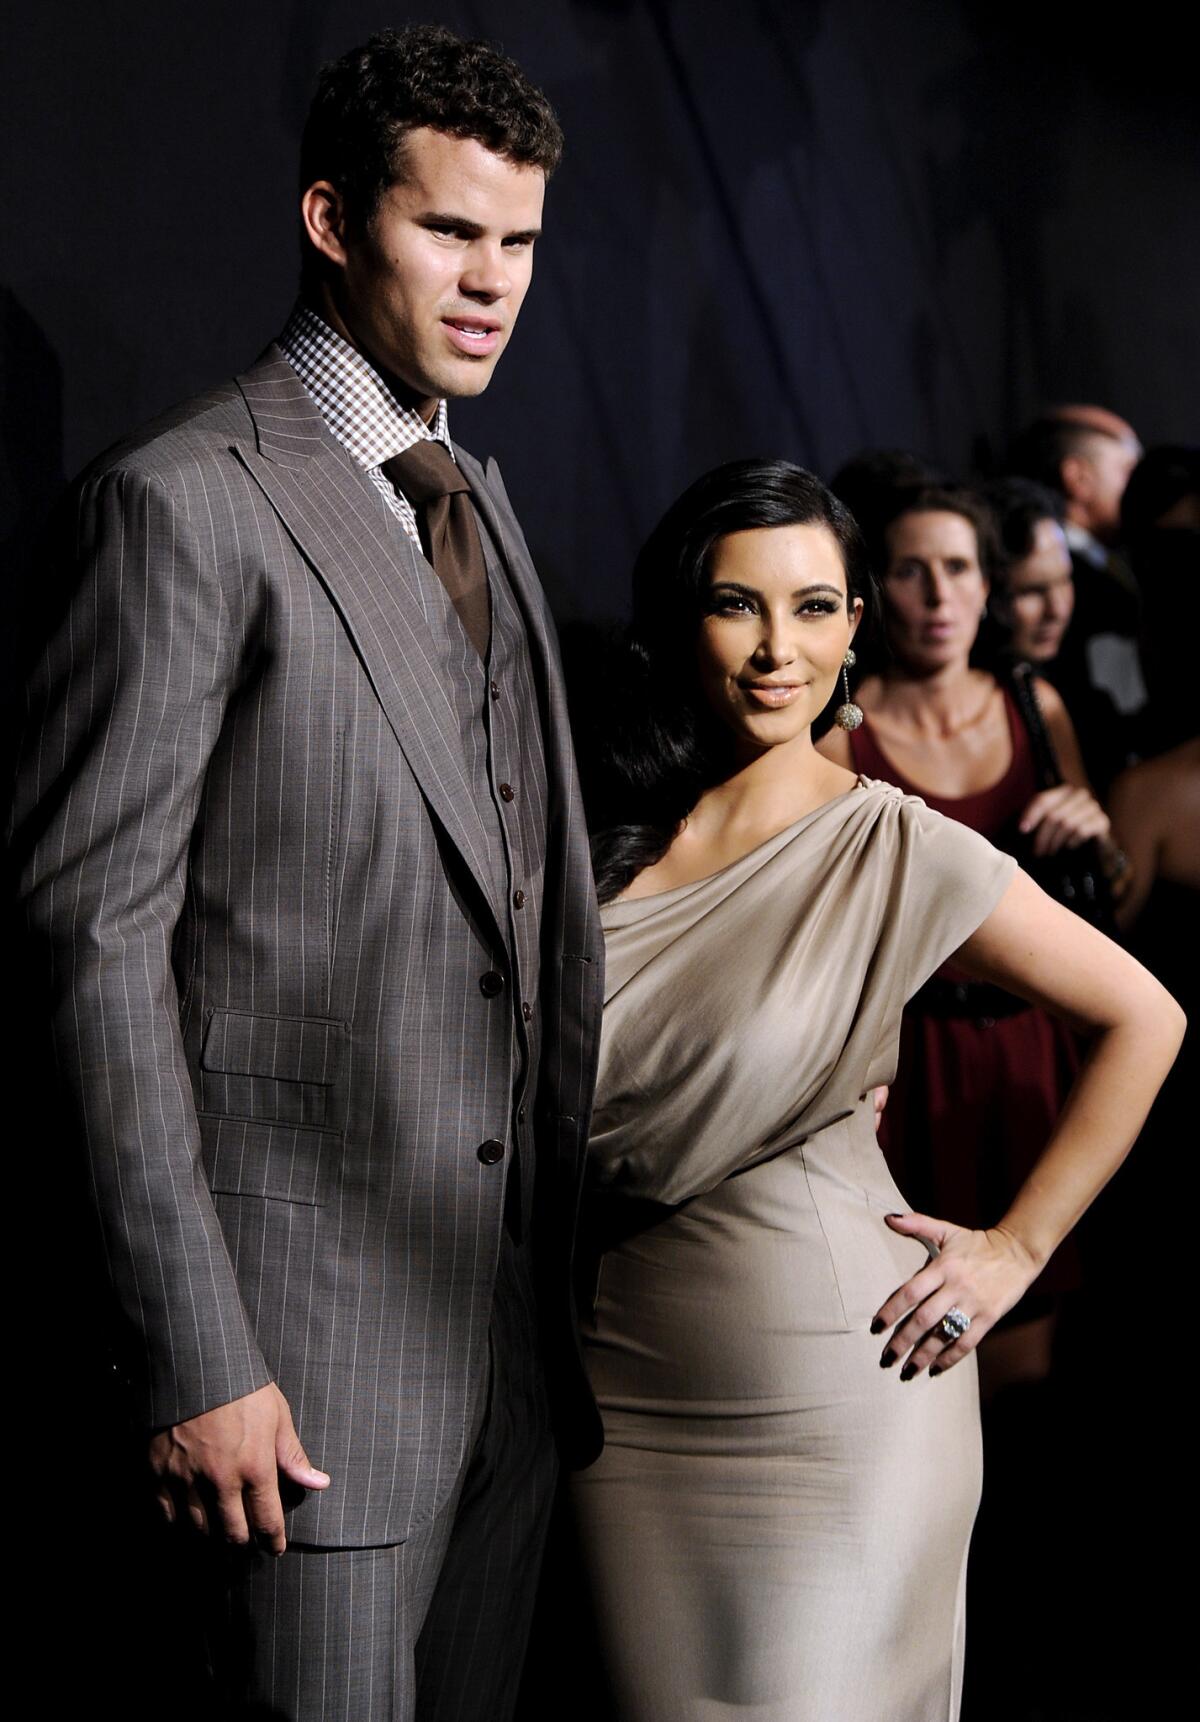 Then-newlyweds Kim Kardashian and Kris Humphries attend a party thrown in their honor in New York in 2011.